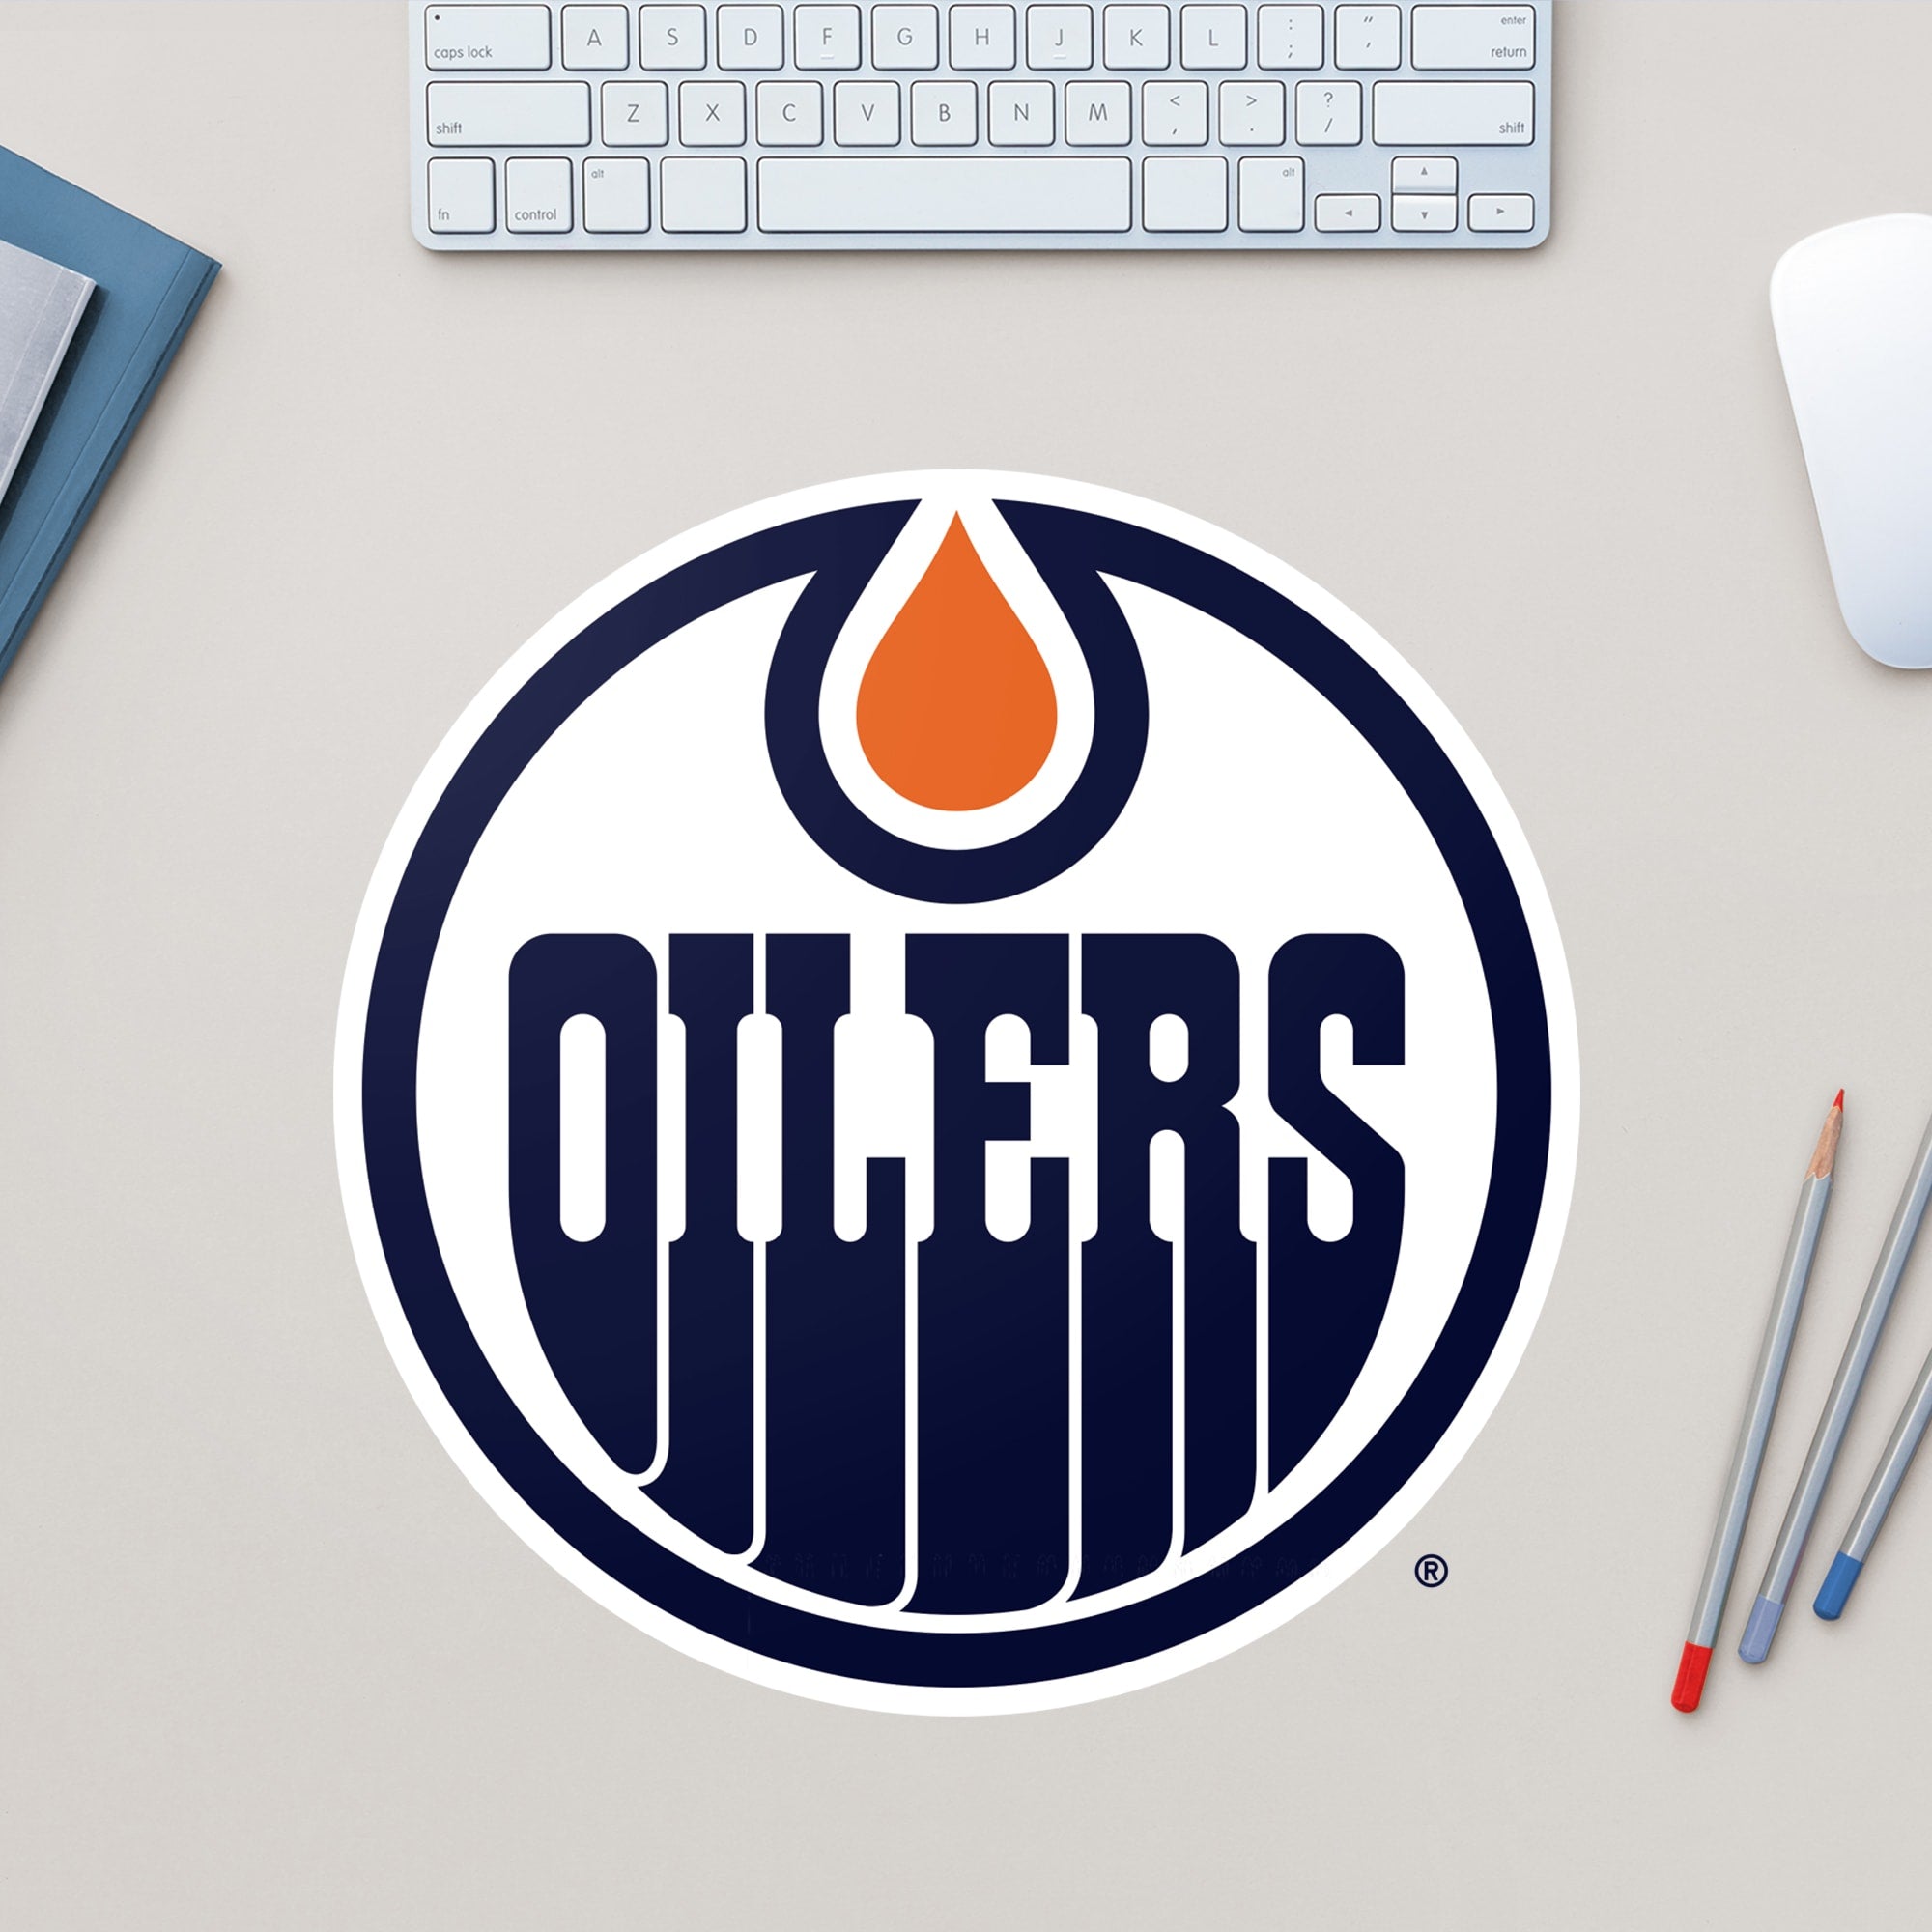 Edmonton Oilers: Logo - Officially Licensed NHL Removable Wall Decal Large by Fathead | Vinyl